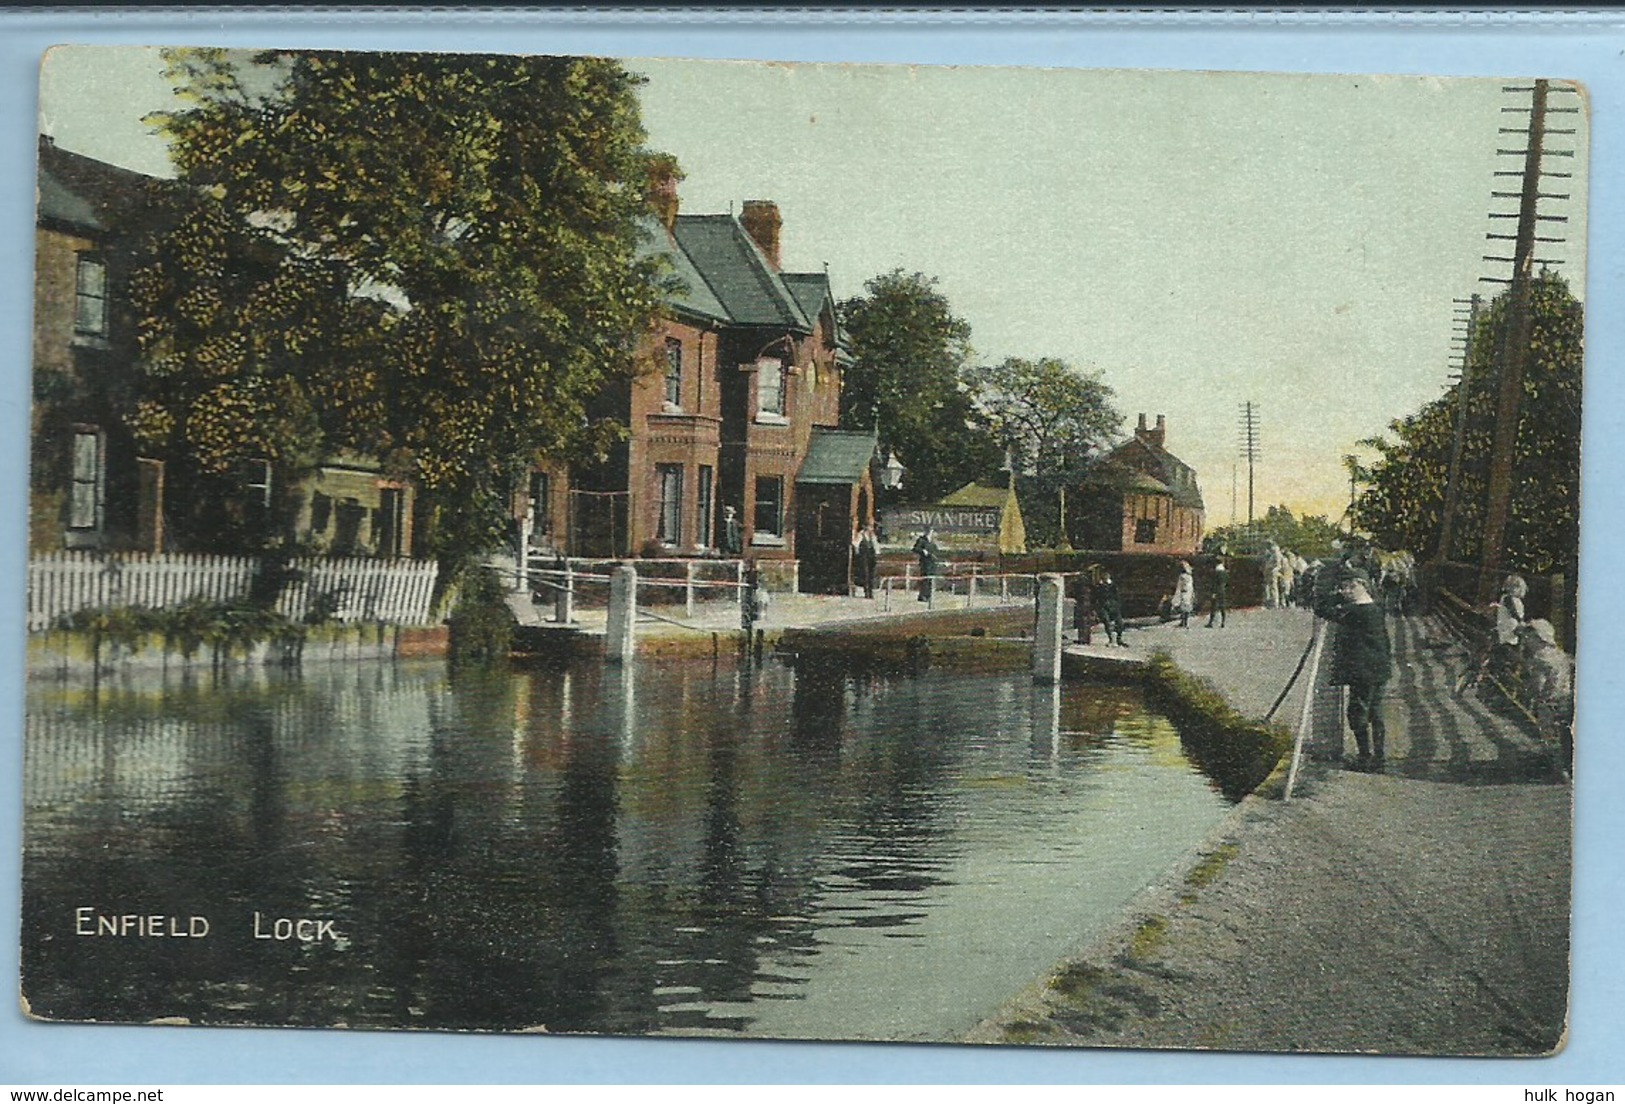 ENFIELD LOCK, ENFIELD, MIDDLESEX. [Ref.36] - Middlesex